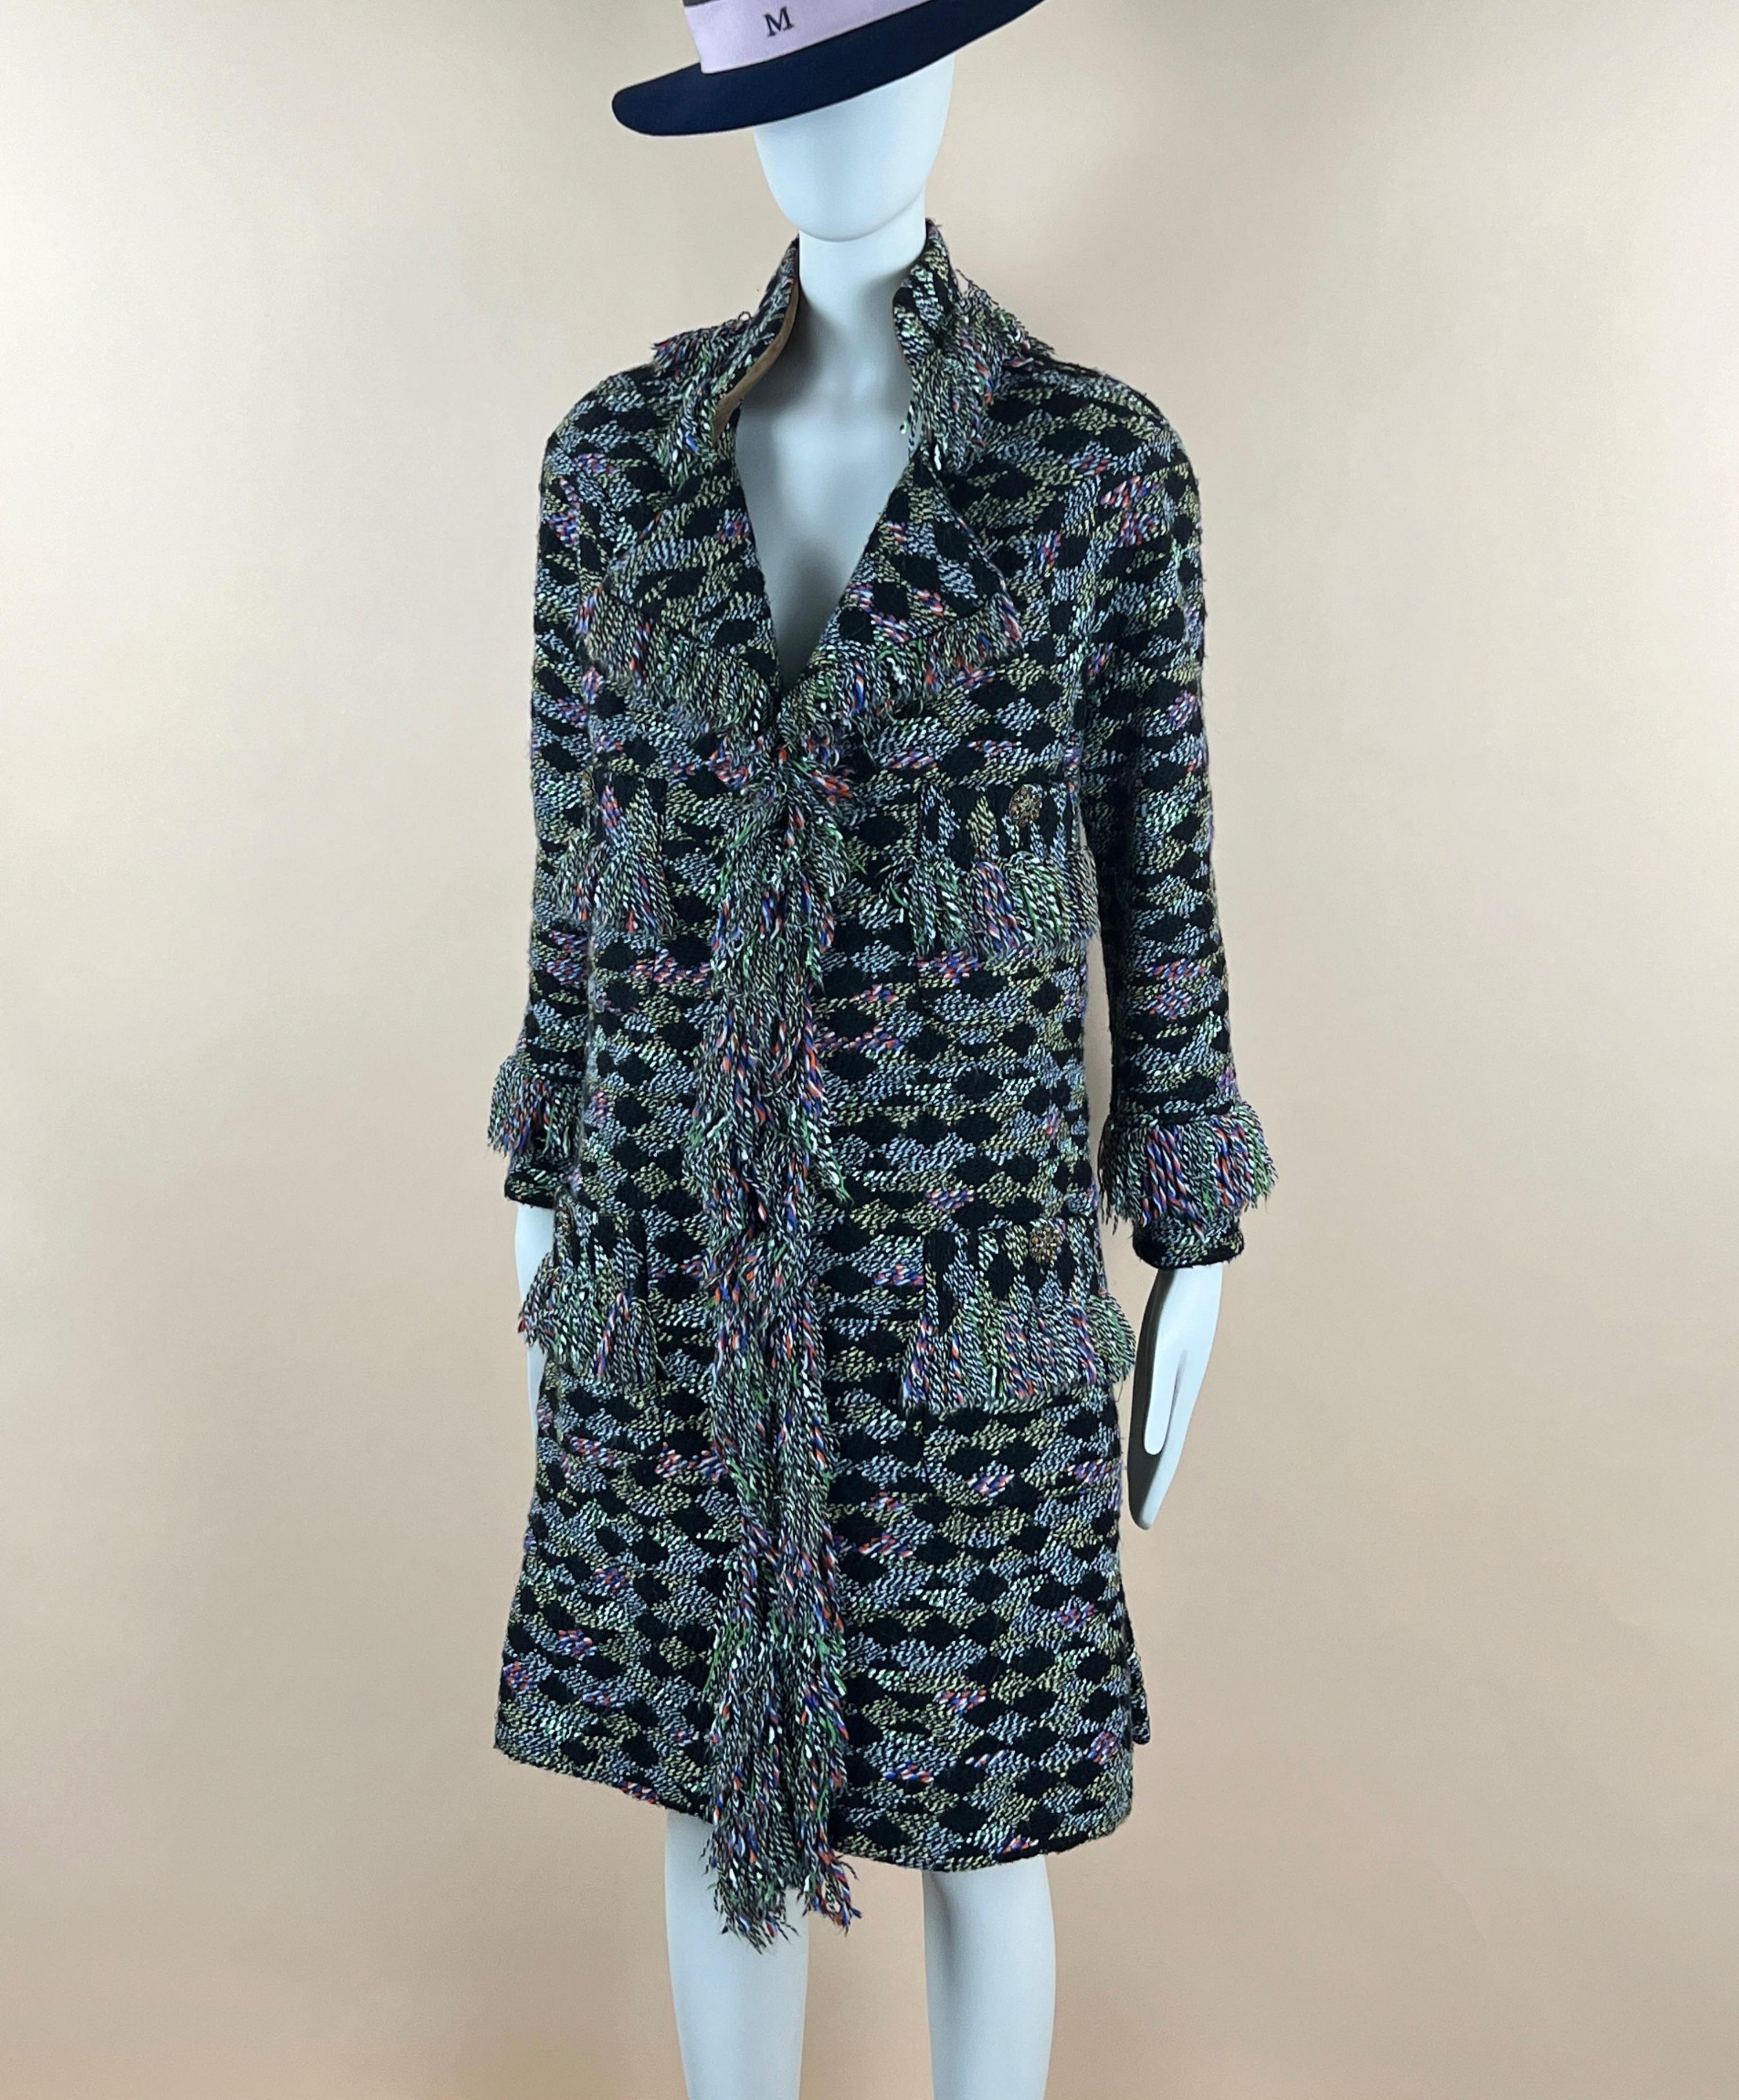 New stunning Chanel tweed coat from Runway of Paris/SALZBURG Metiers d'Art Collection, 2015 Pre-Fall
Retail price ca. 9,000$
- made of fantasy tweed with signature fringe edging
- CC logo Jewel buttons embellished with natural stones and crystals
-